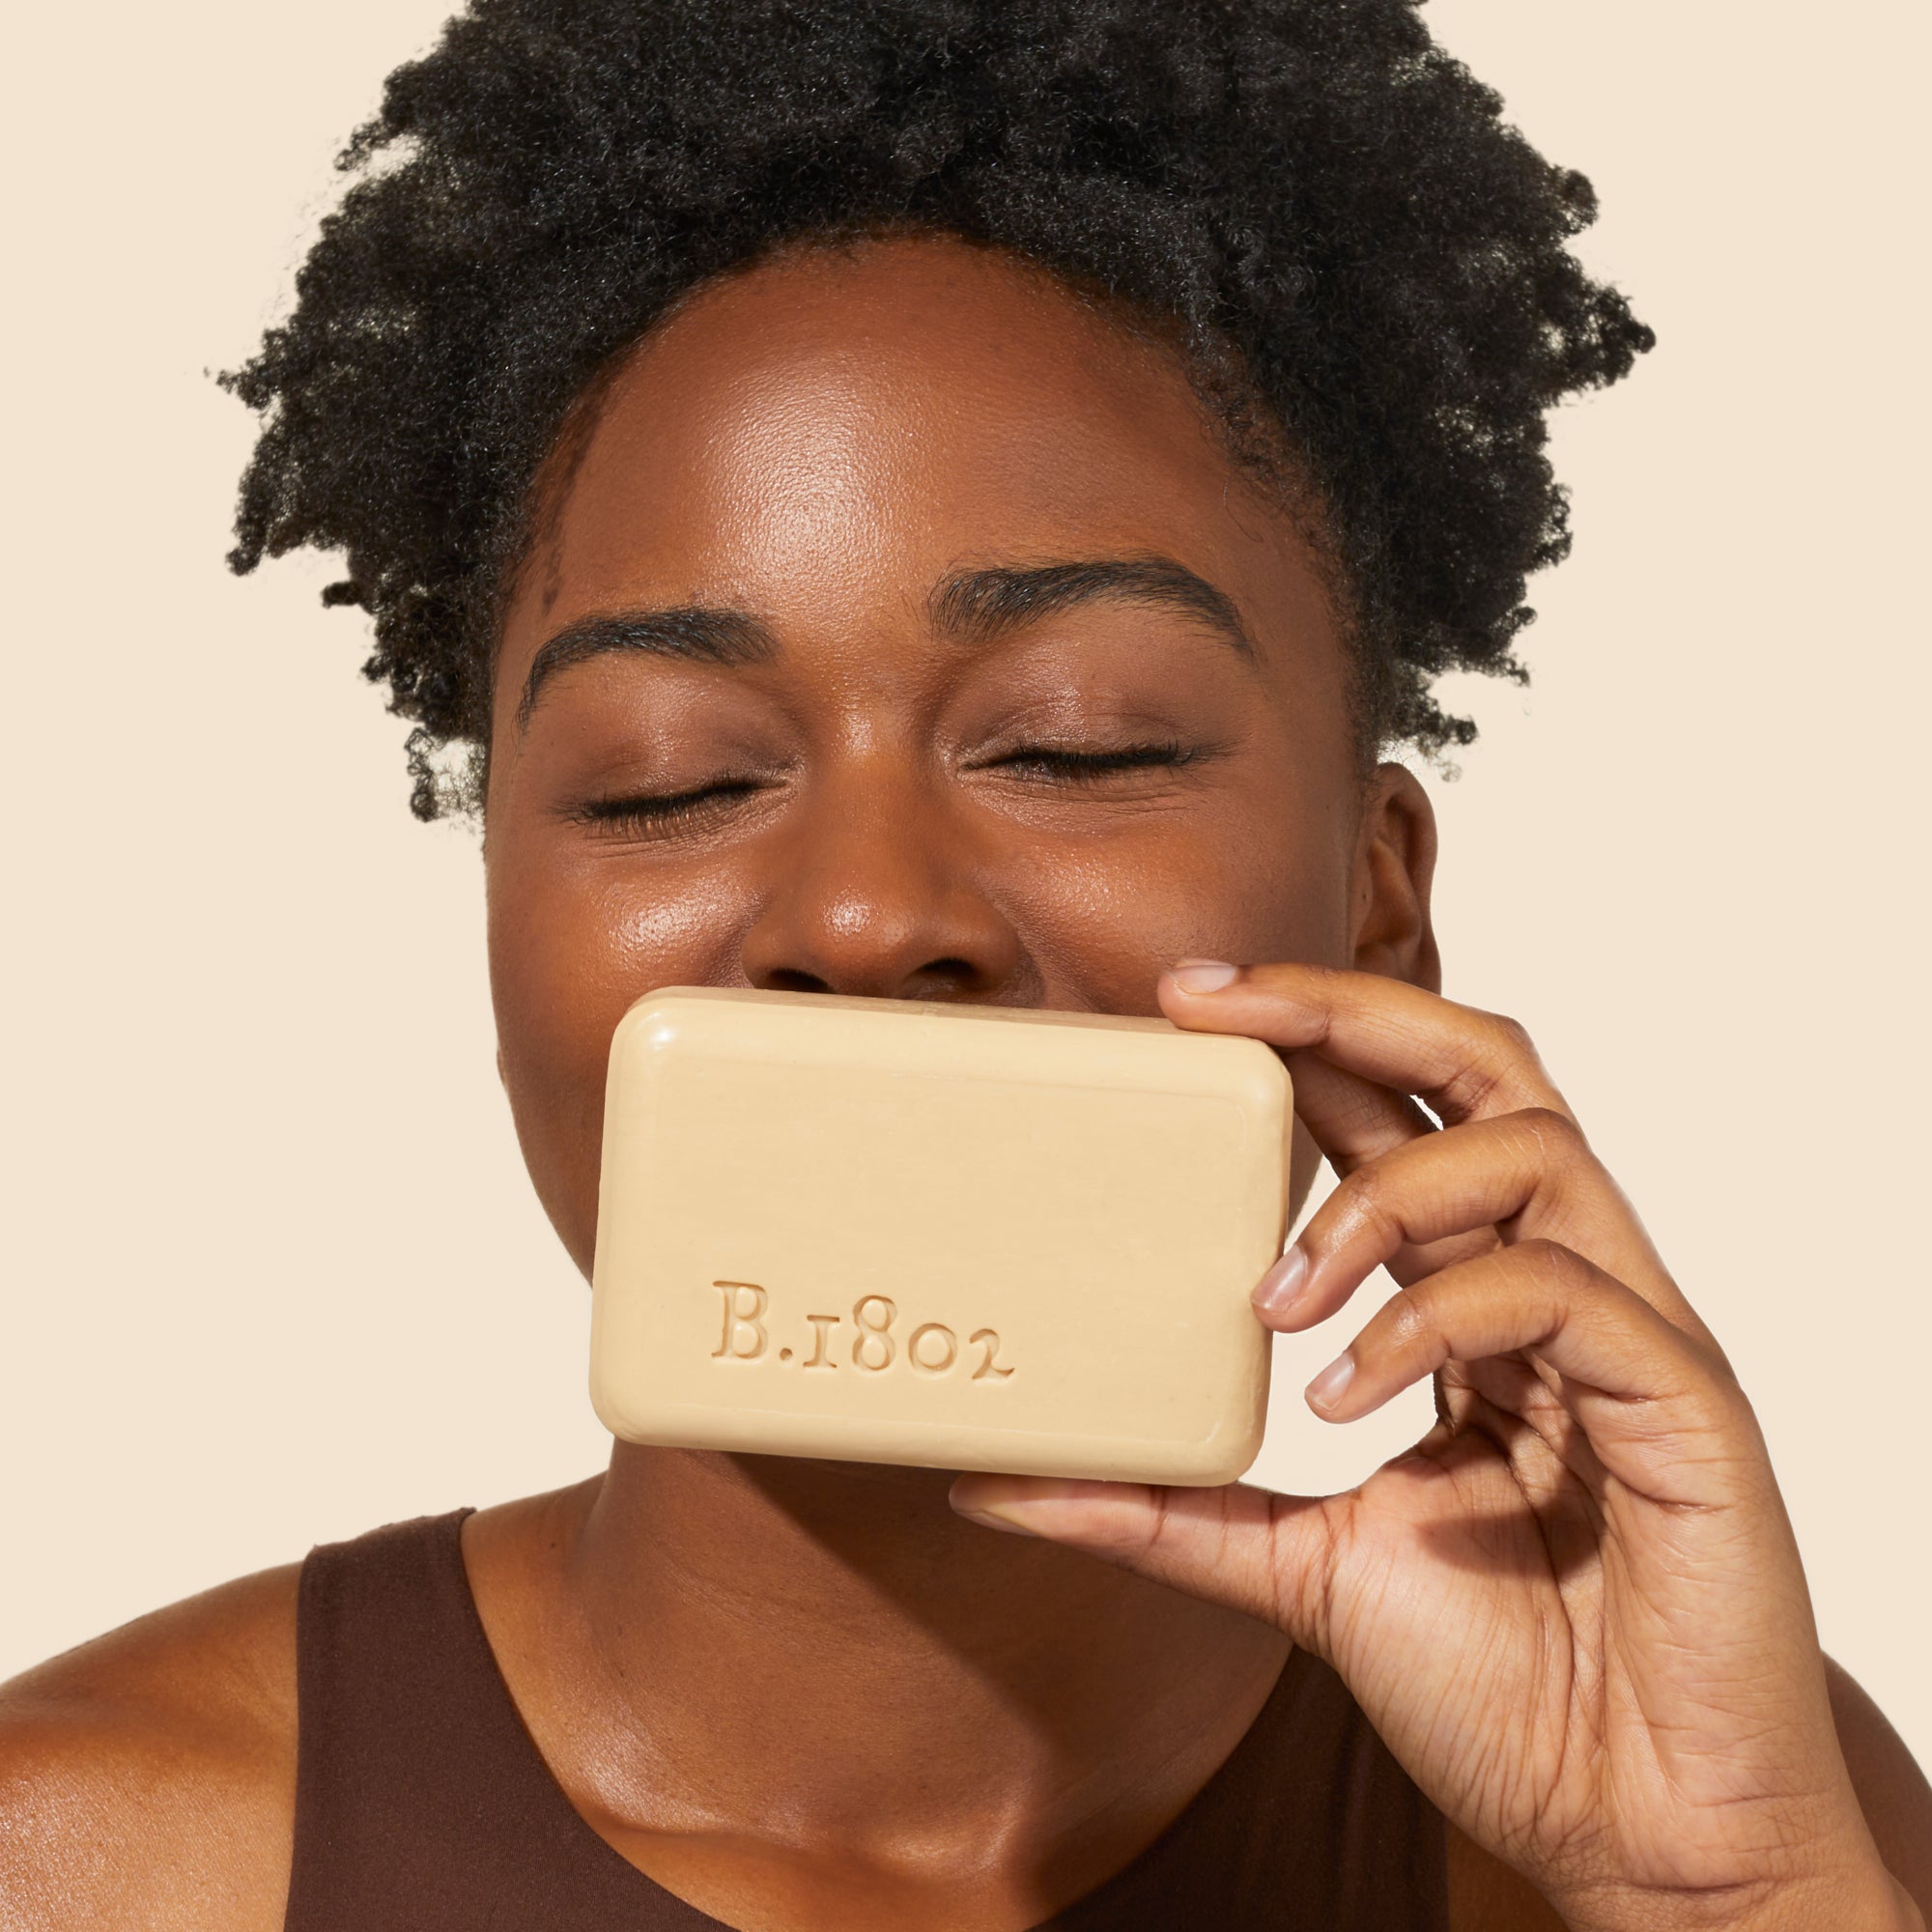 Up close shot of model holding up an unwrapped Beekman 1802 goat milk bar soap to her nose and smelling it with her eyes closed, on a cream colored background.